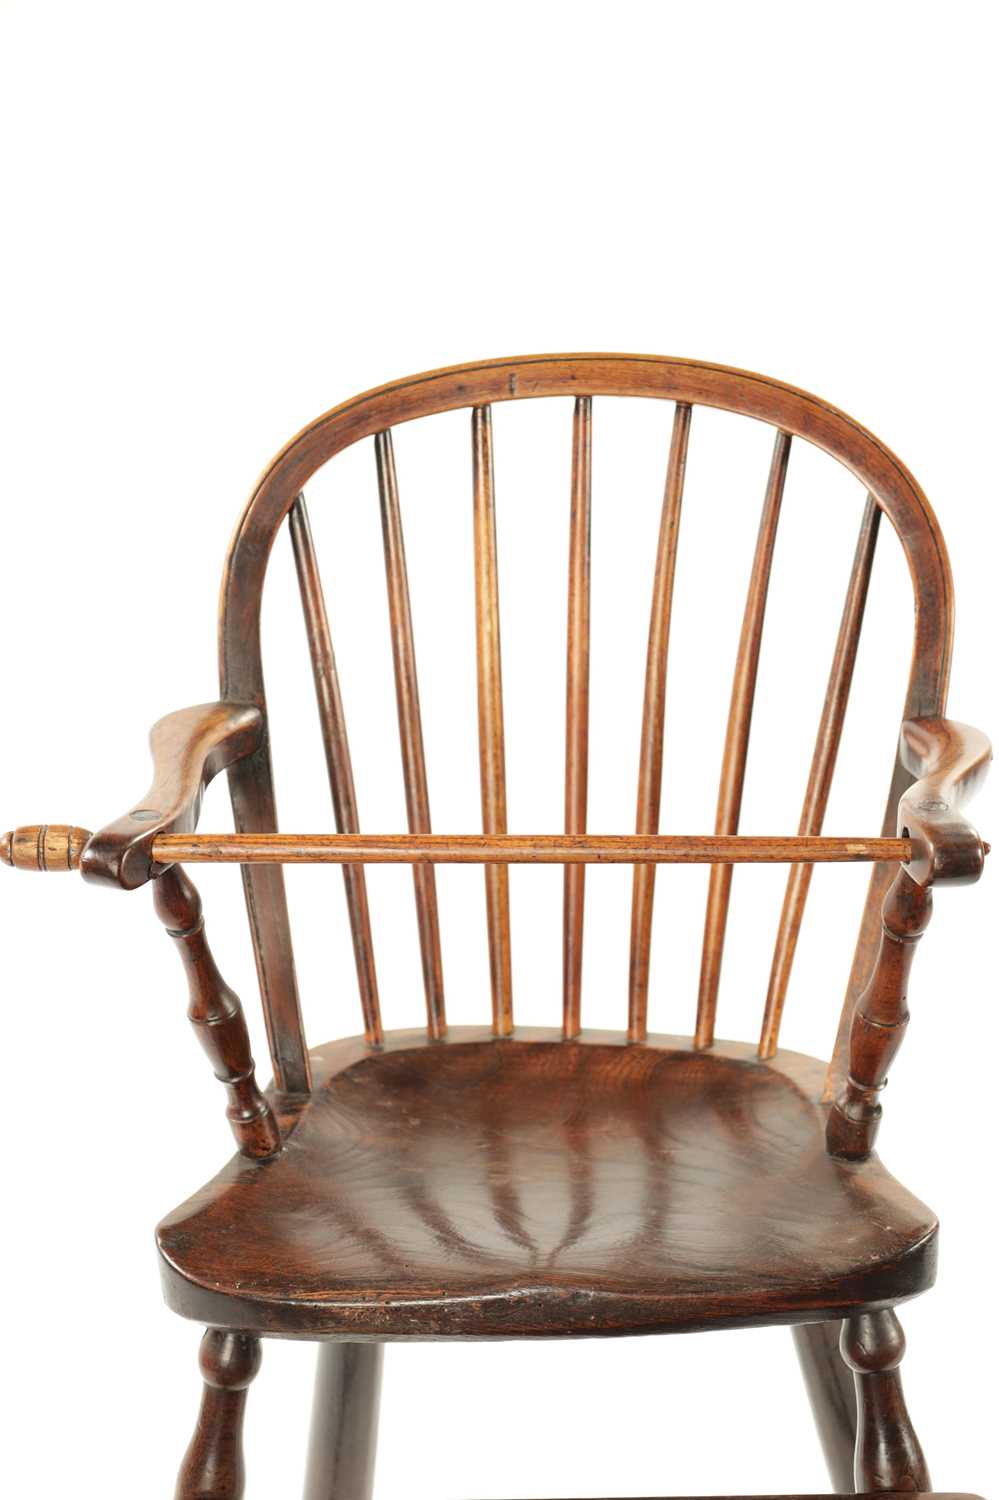 A 19TH CENTURY FRUITWOOD CHILDREN’S SPINDLE BACK HIGH CHAIR - Image 3 of 7